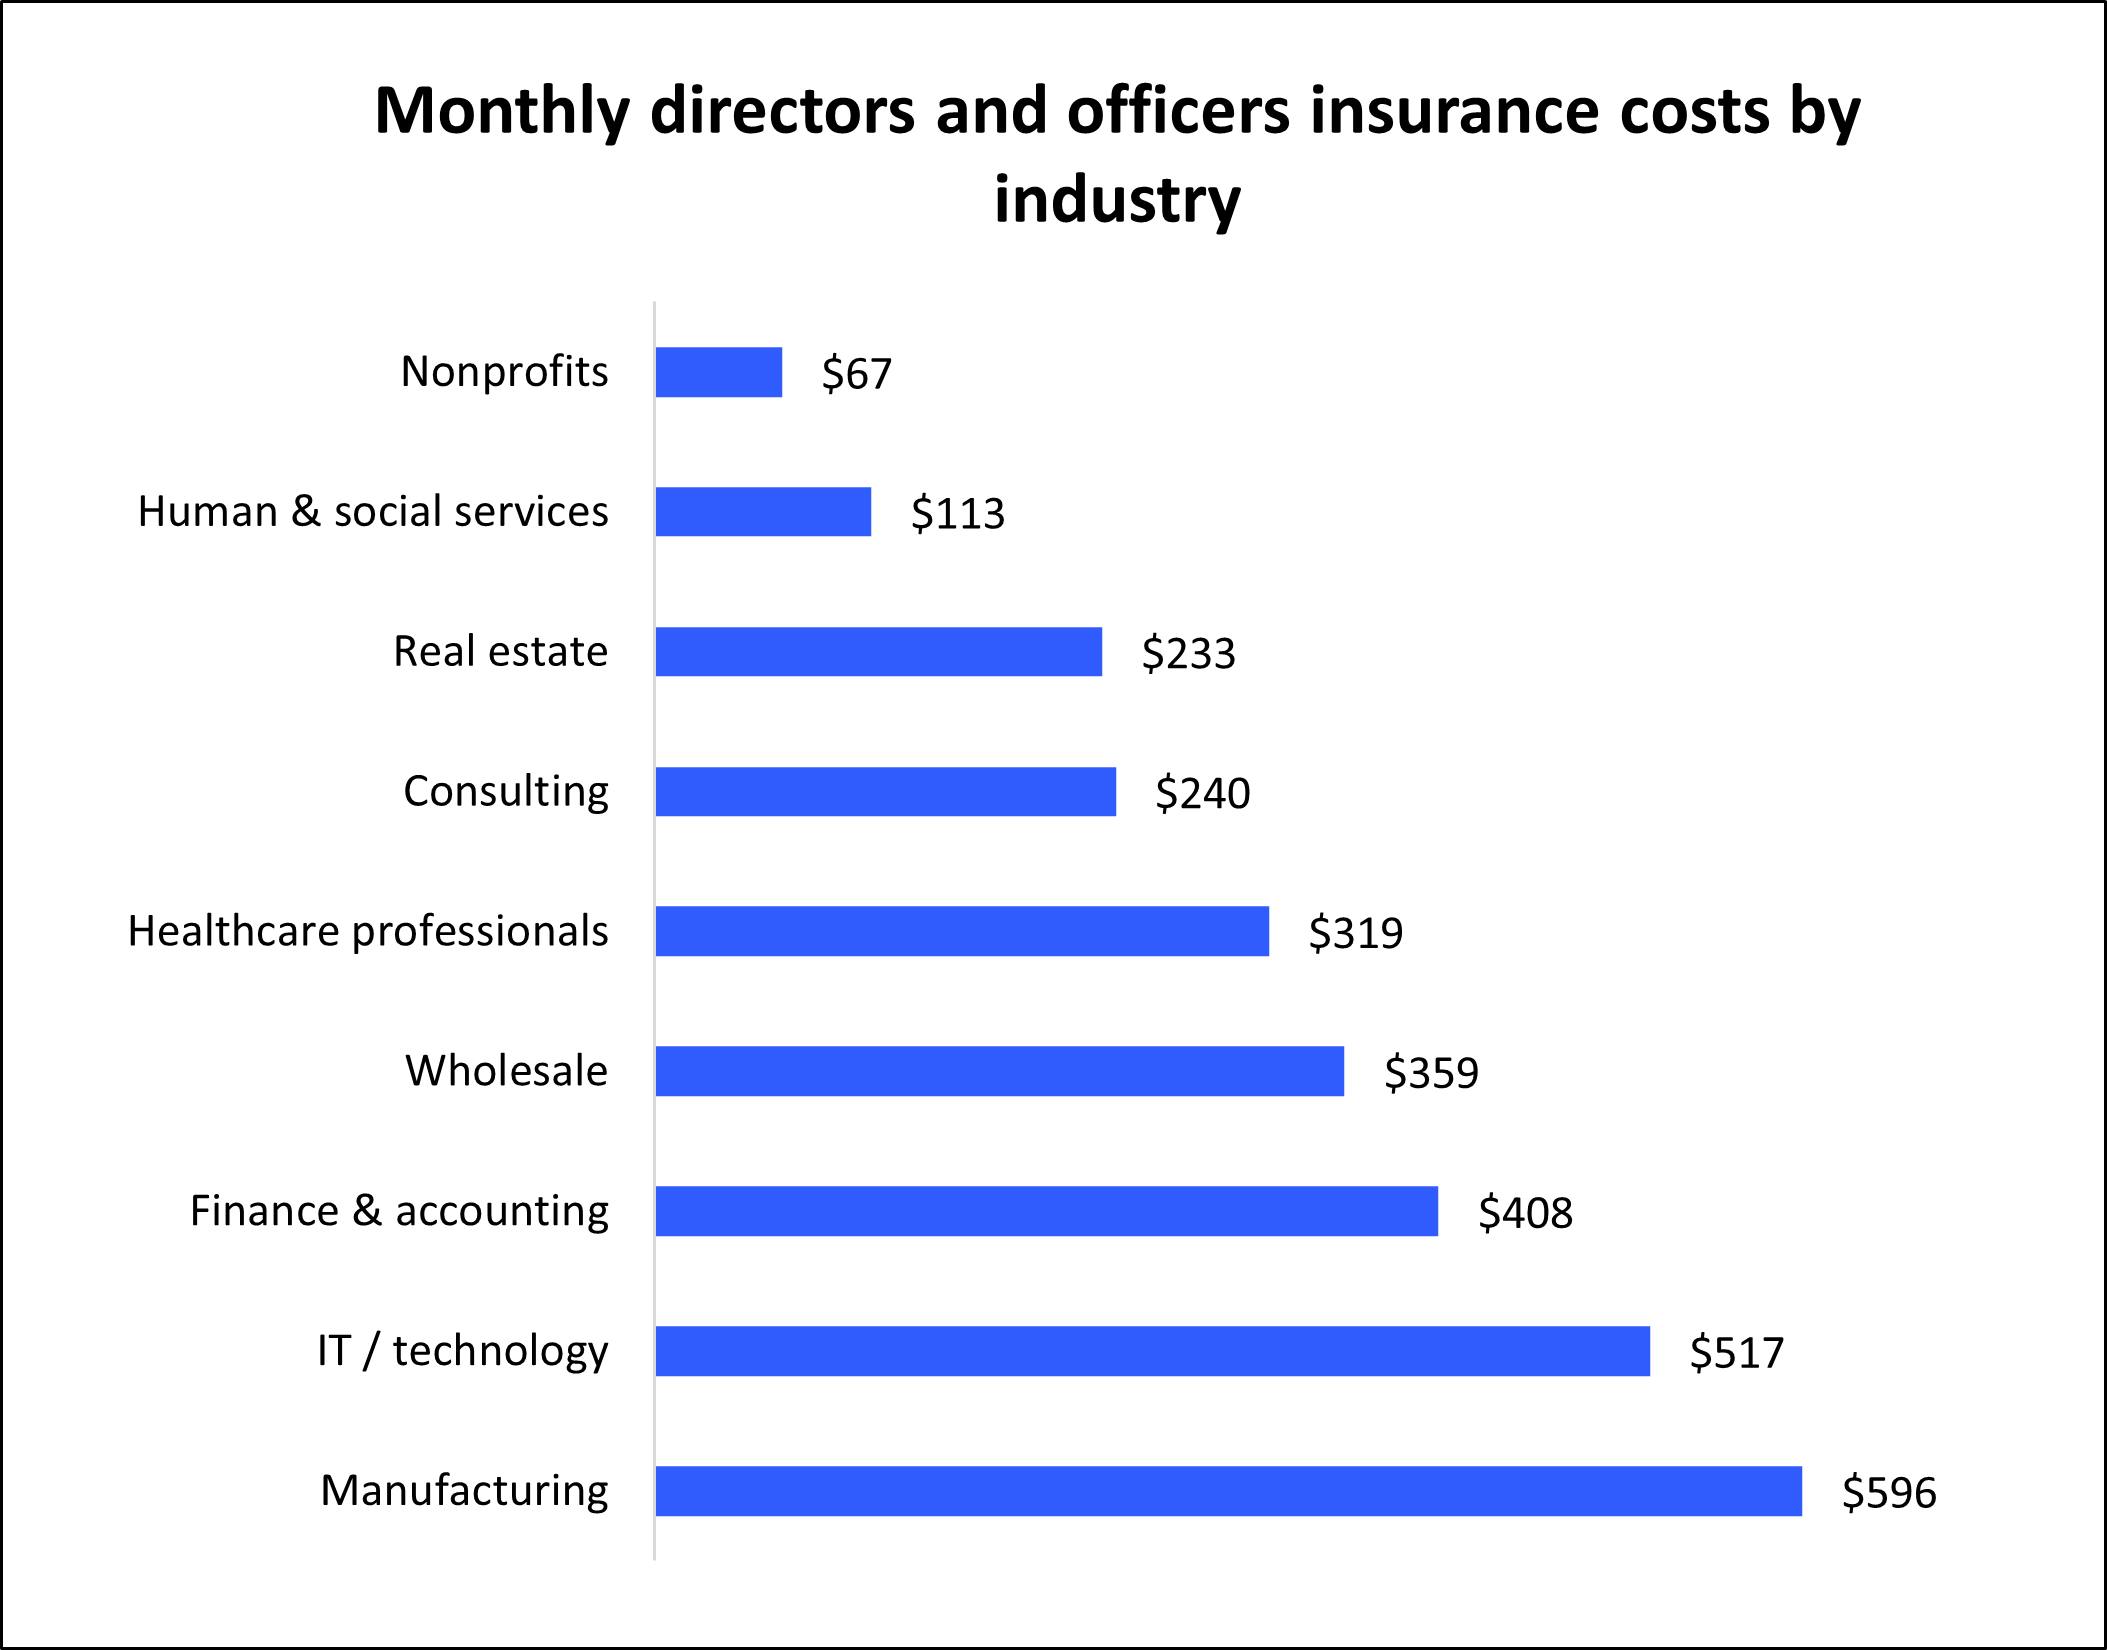 Average monthly cost of directors and officers insurance for Insureon customers by industry.